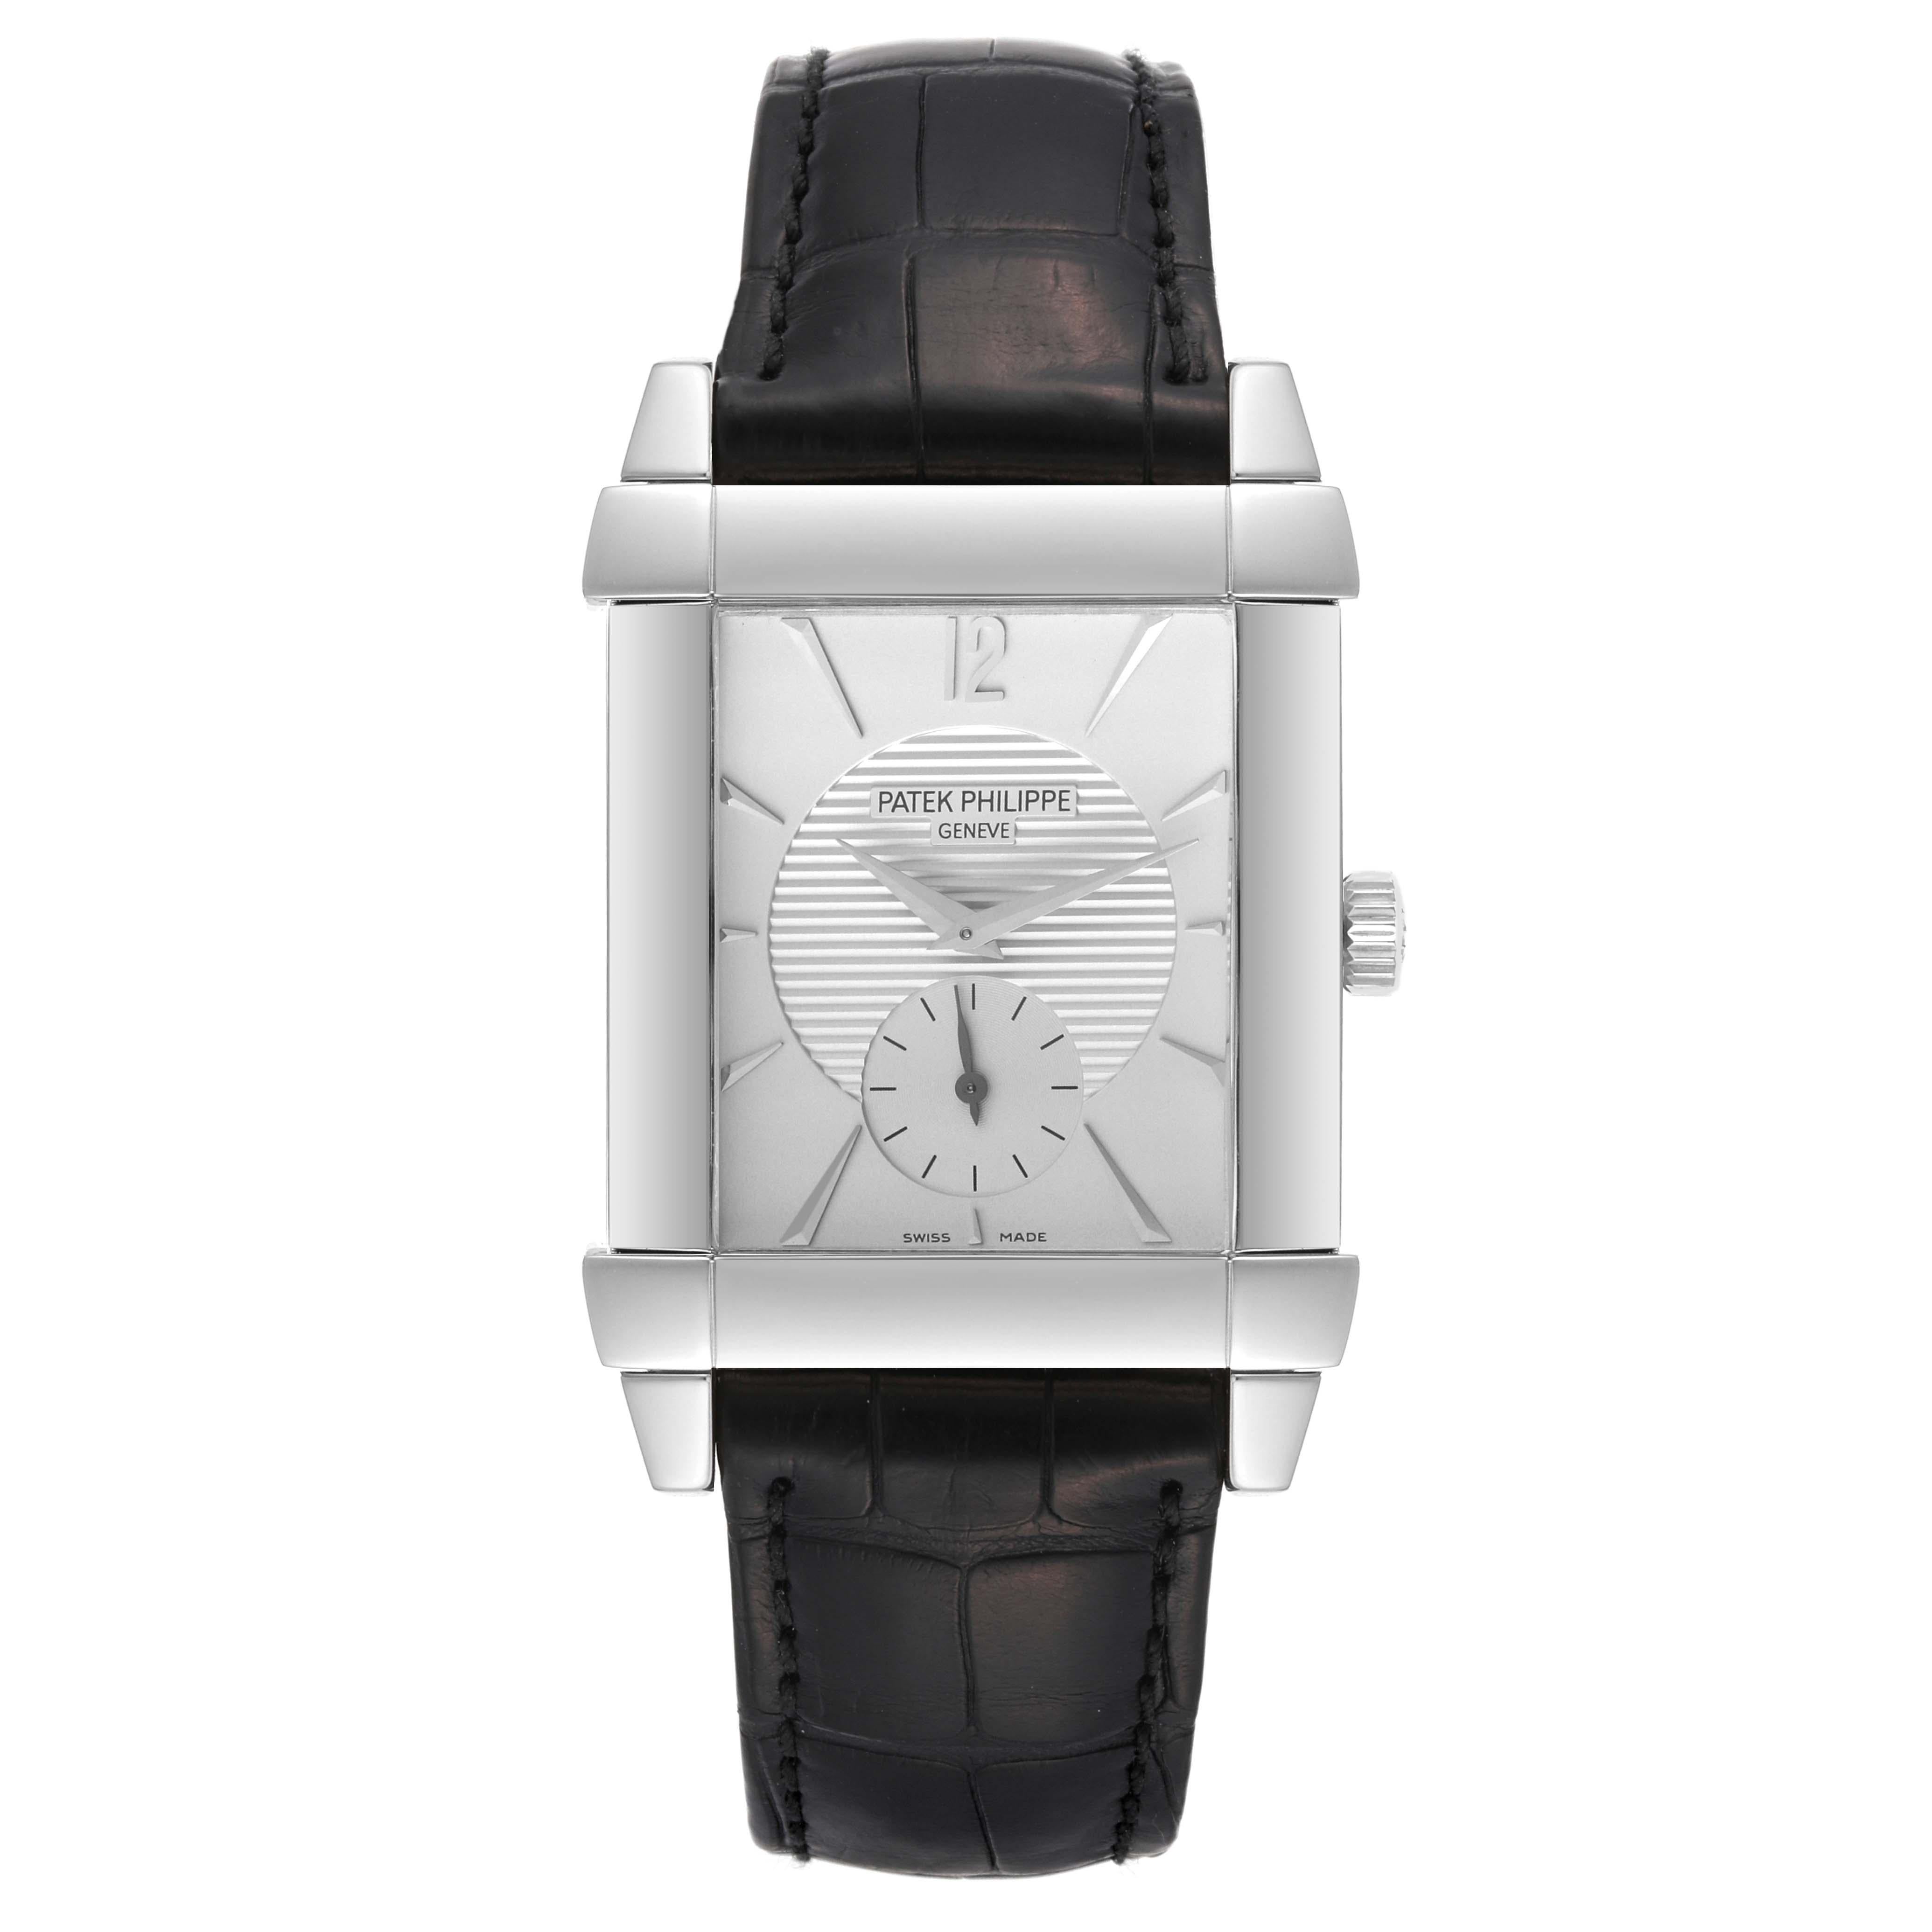 Patek Philippe Gondolo Small Seconds White Gold Silver Dial Mens Watch 5111. Manual winding movement. 18k white gold rectangular case 47.5 mm x 35.5 mm. . Scratch resistant sapphire crystal. Silver dial with raised baton hour markers and an Arabic